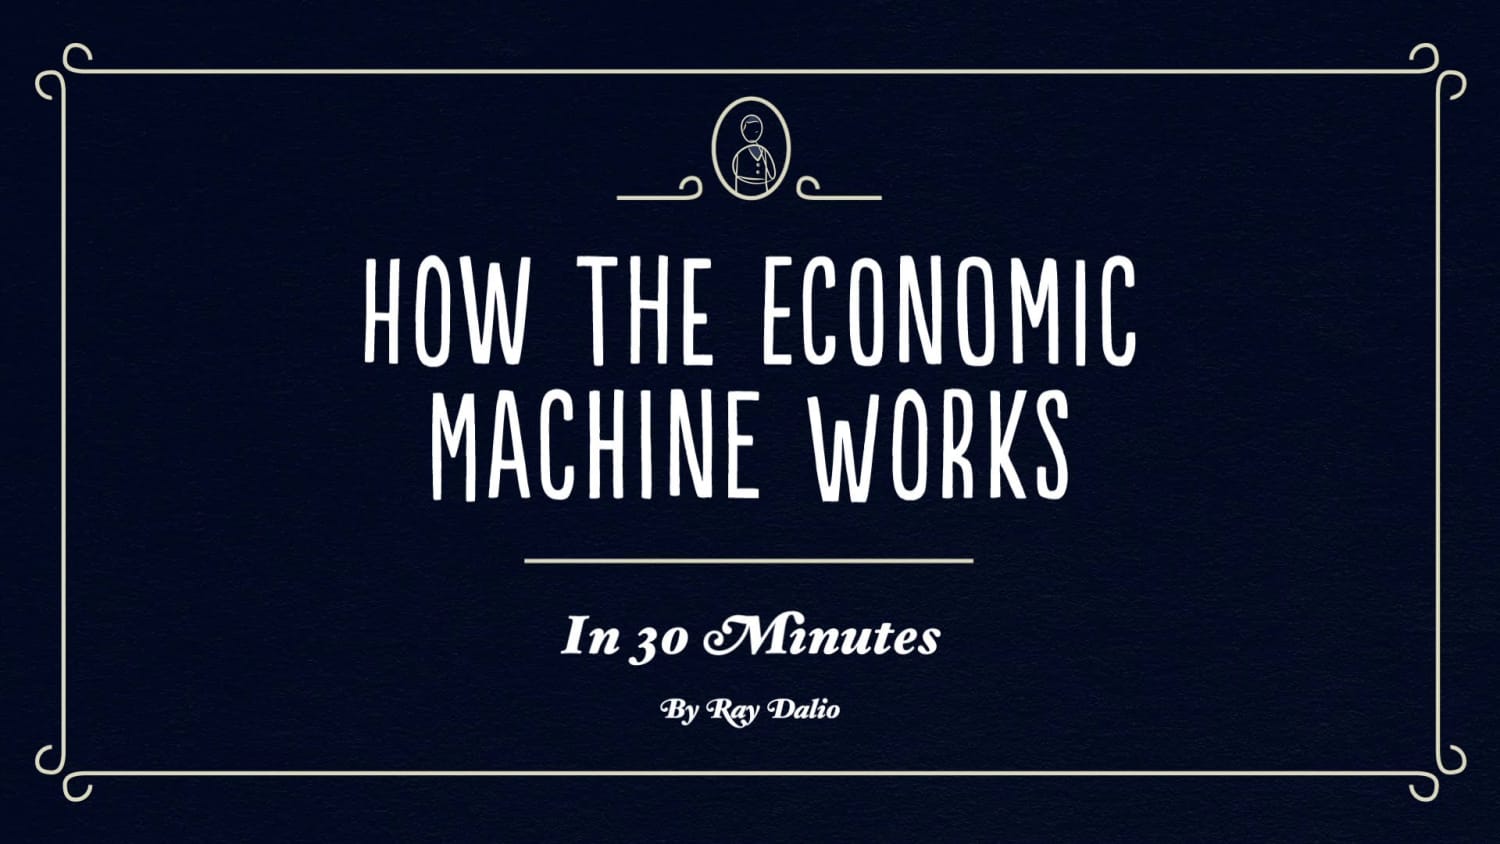 Economics 101: Hedge Fund Investor Ray Dalio Explains How the Economy Works in a 30-Minute Animated Video